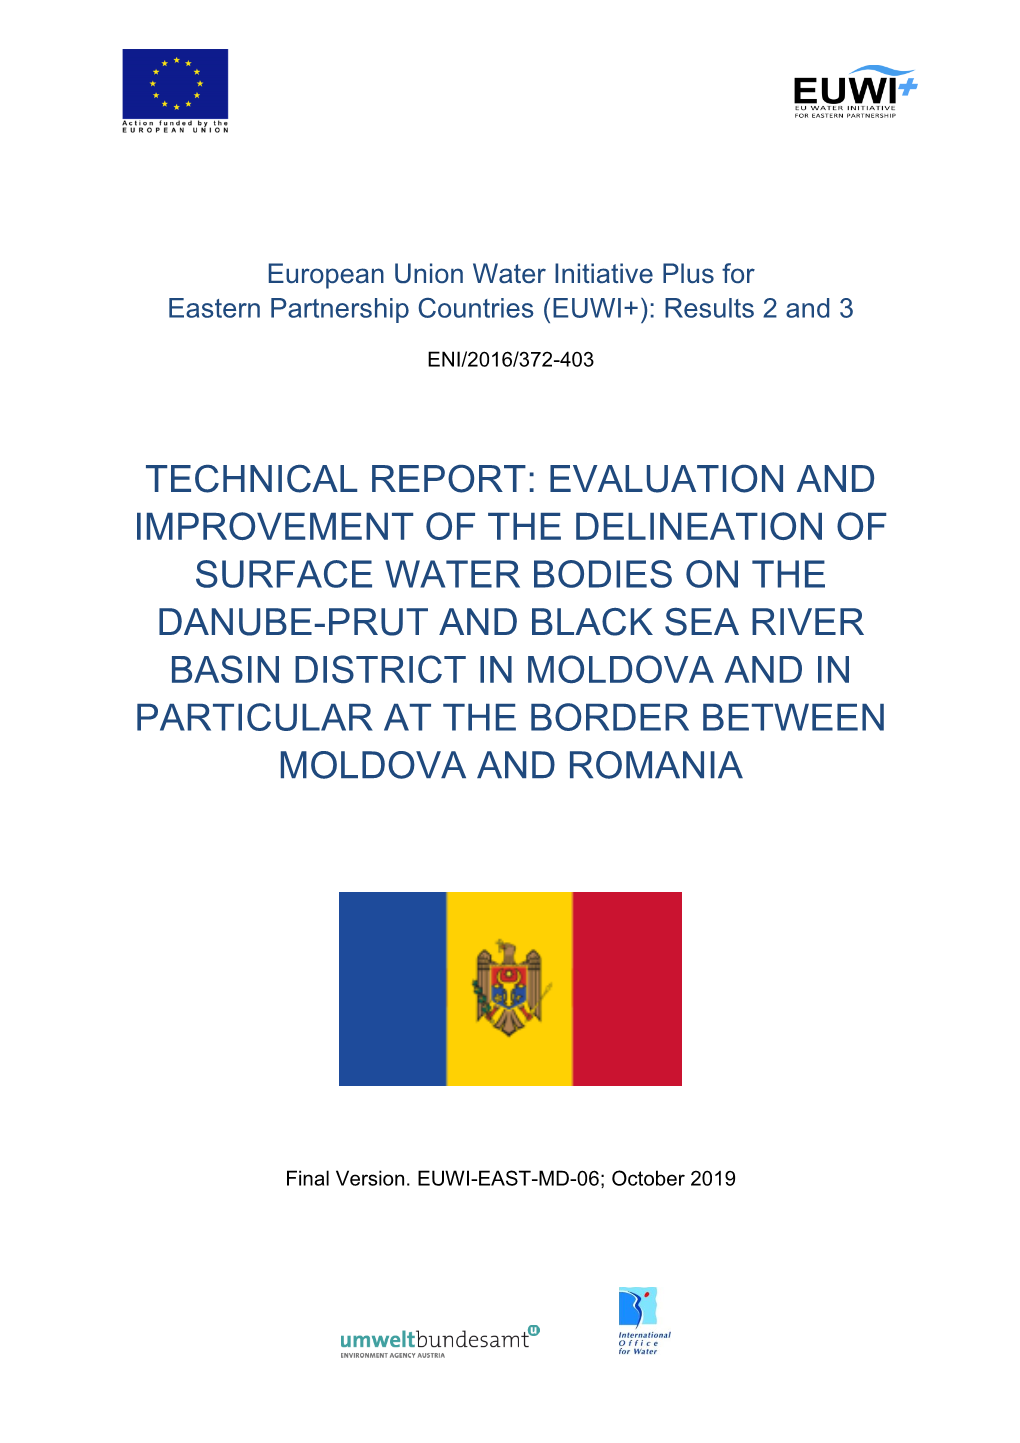 Technical Report: Evaluation And